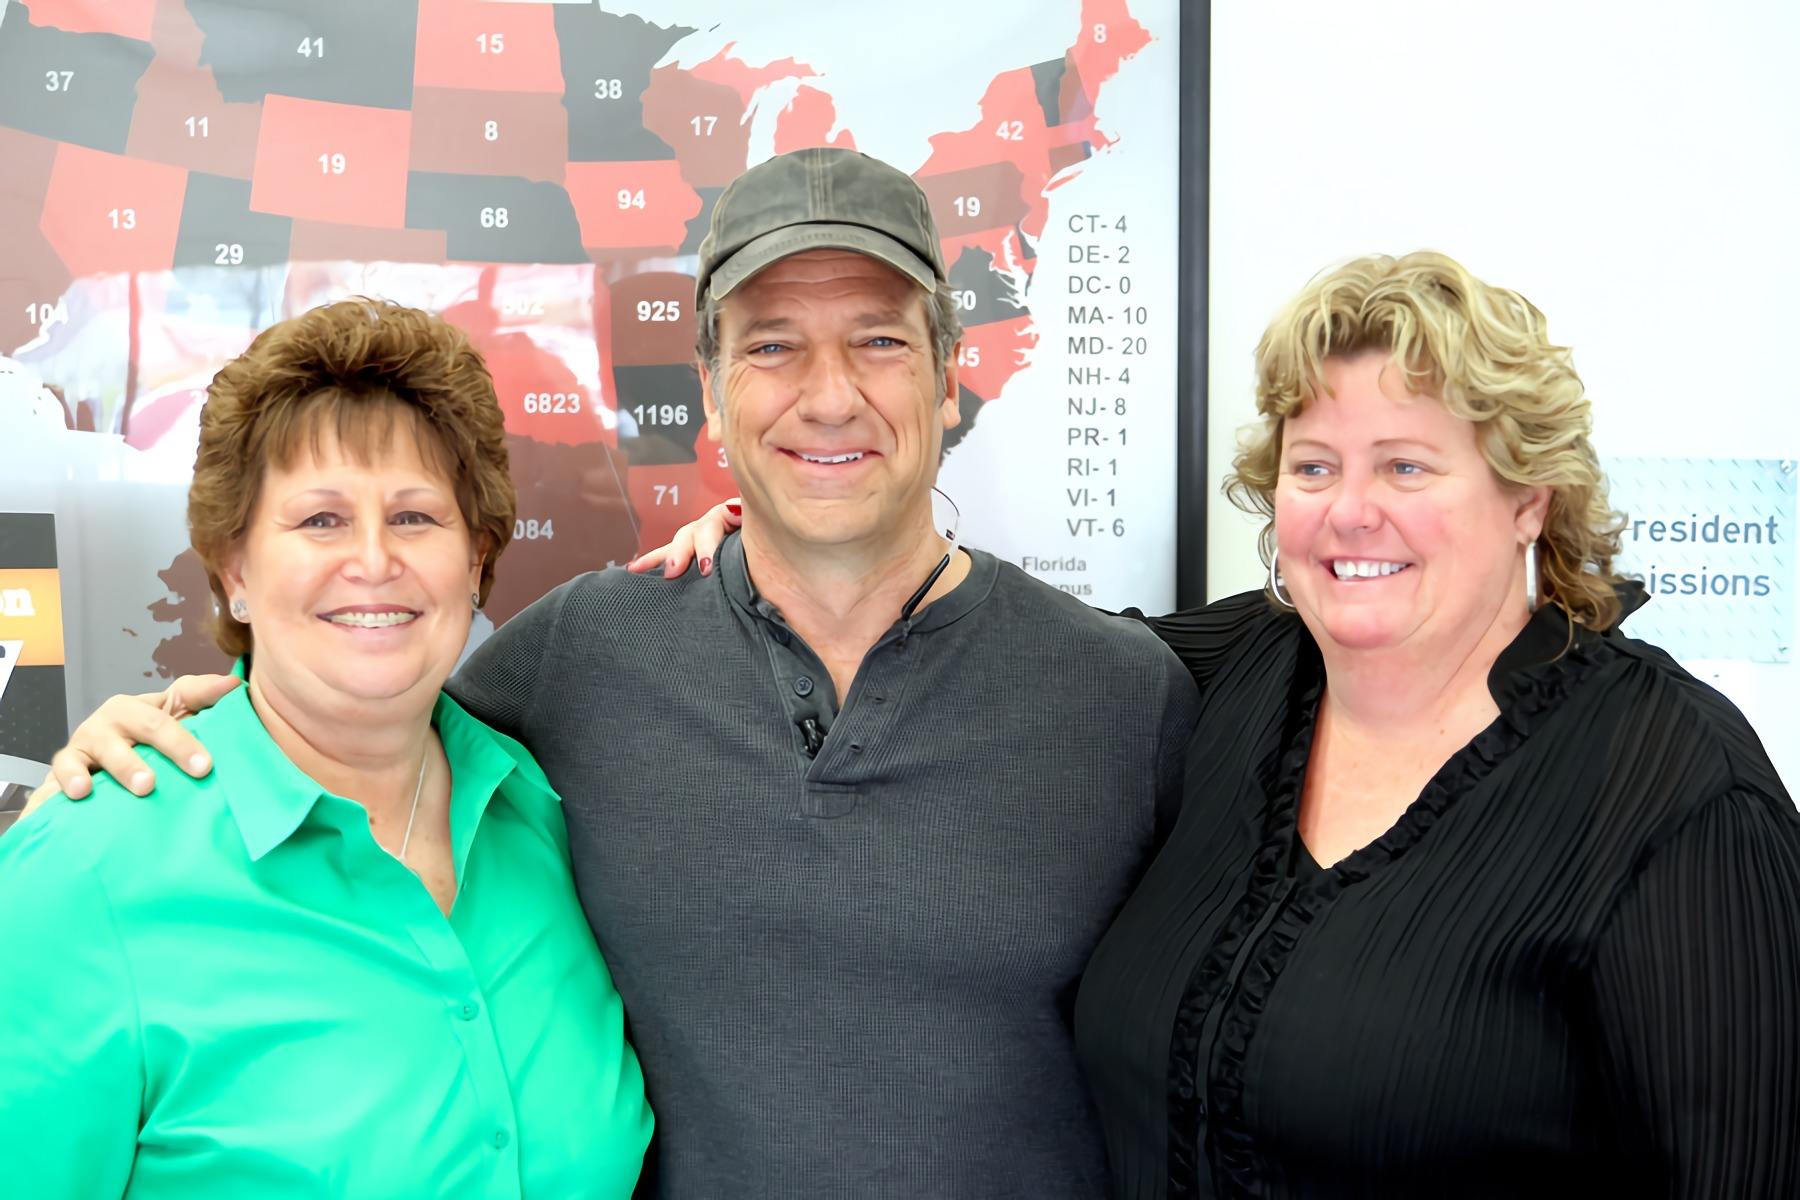 Mike Rowe with Stratatech CEO Mary Kelly